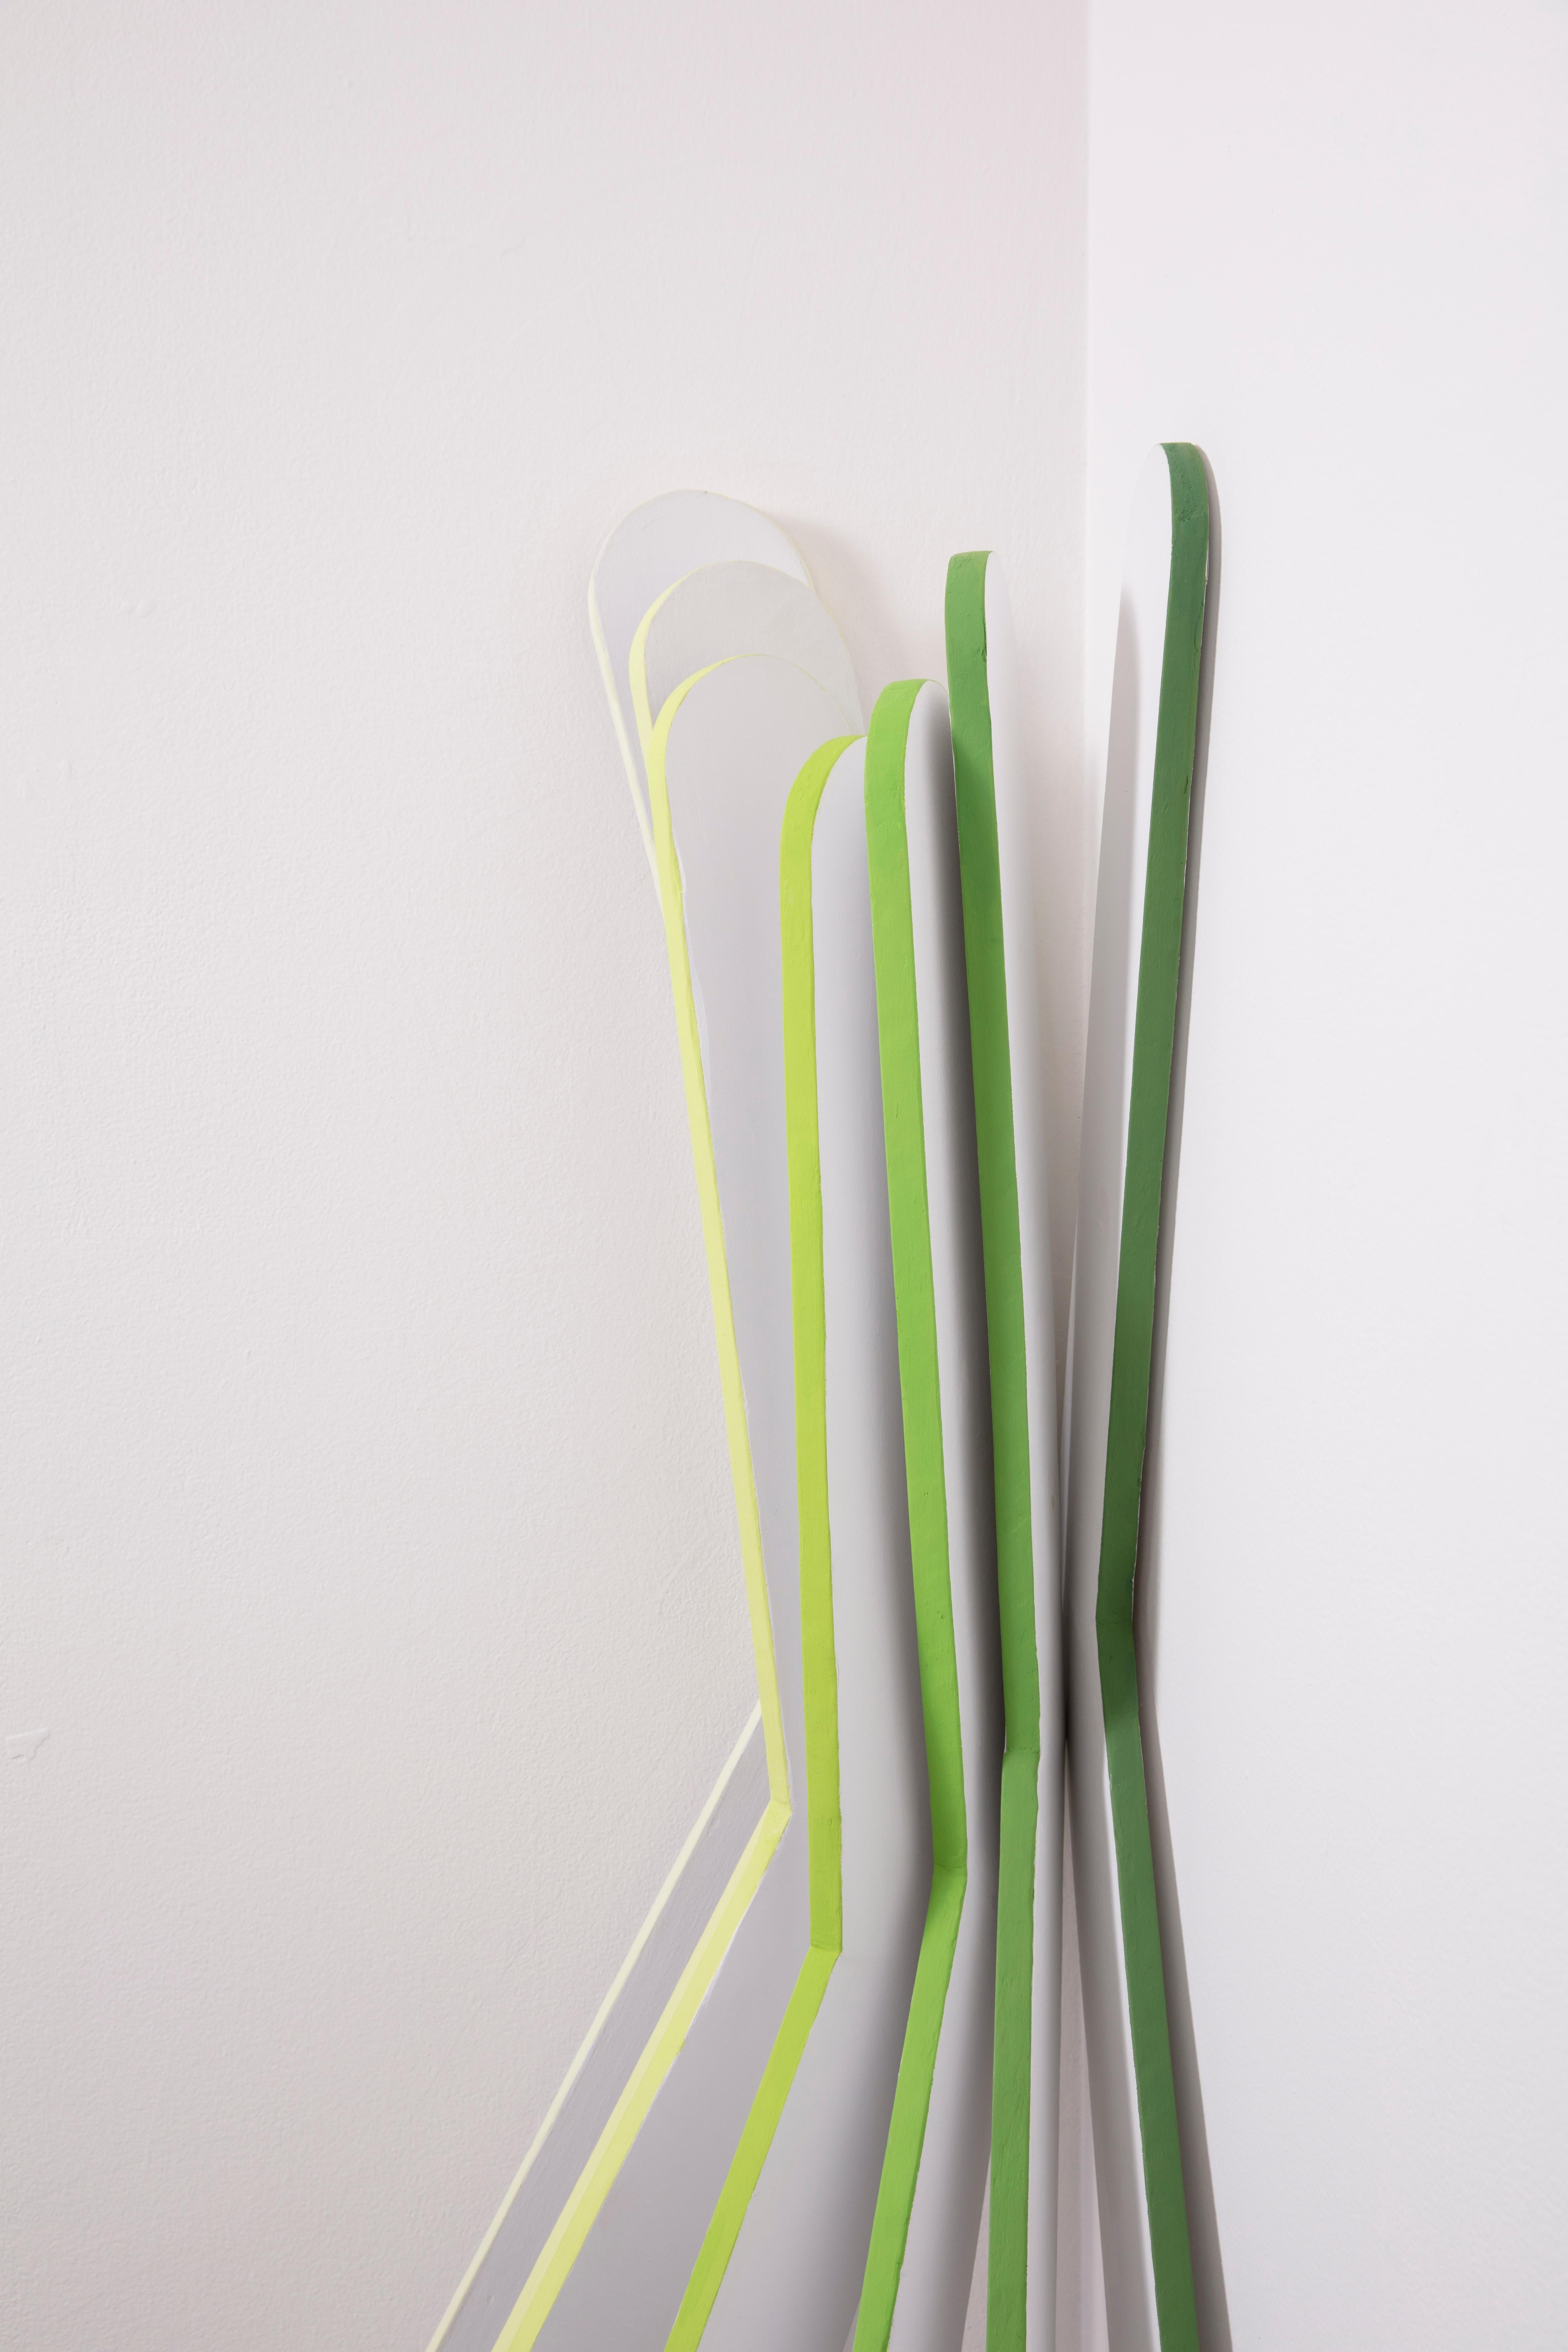 GYNOID - Installation Sculpture, Green and White, Wood, Contemporary 1